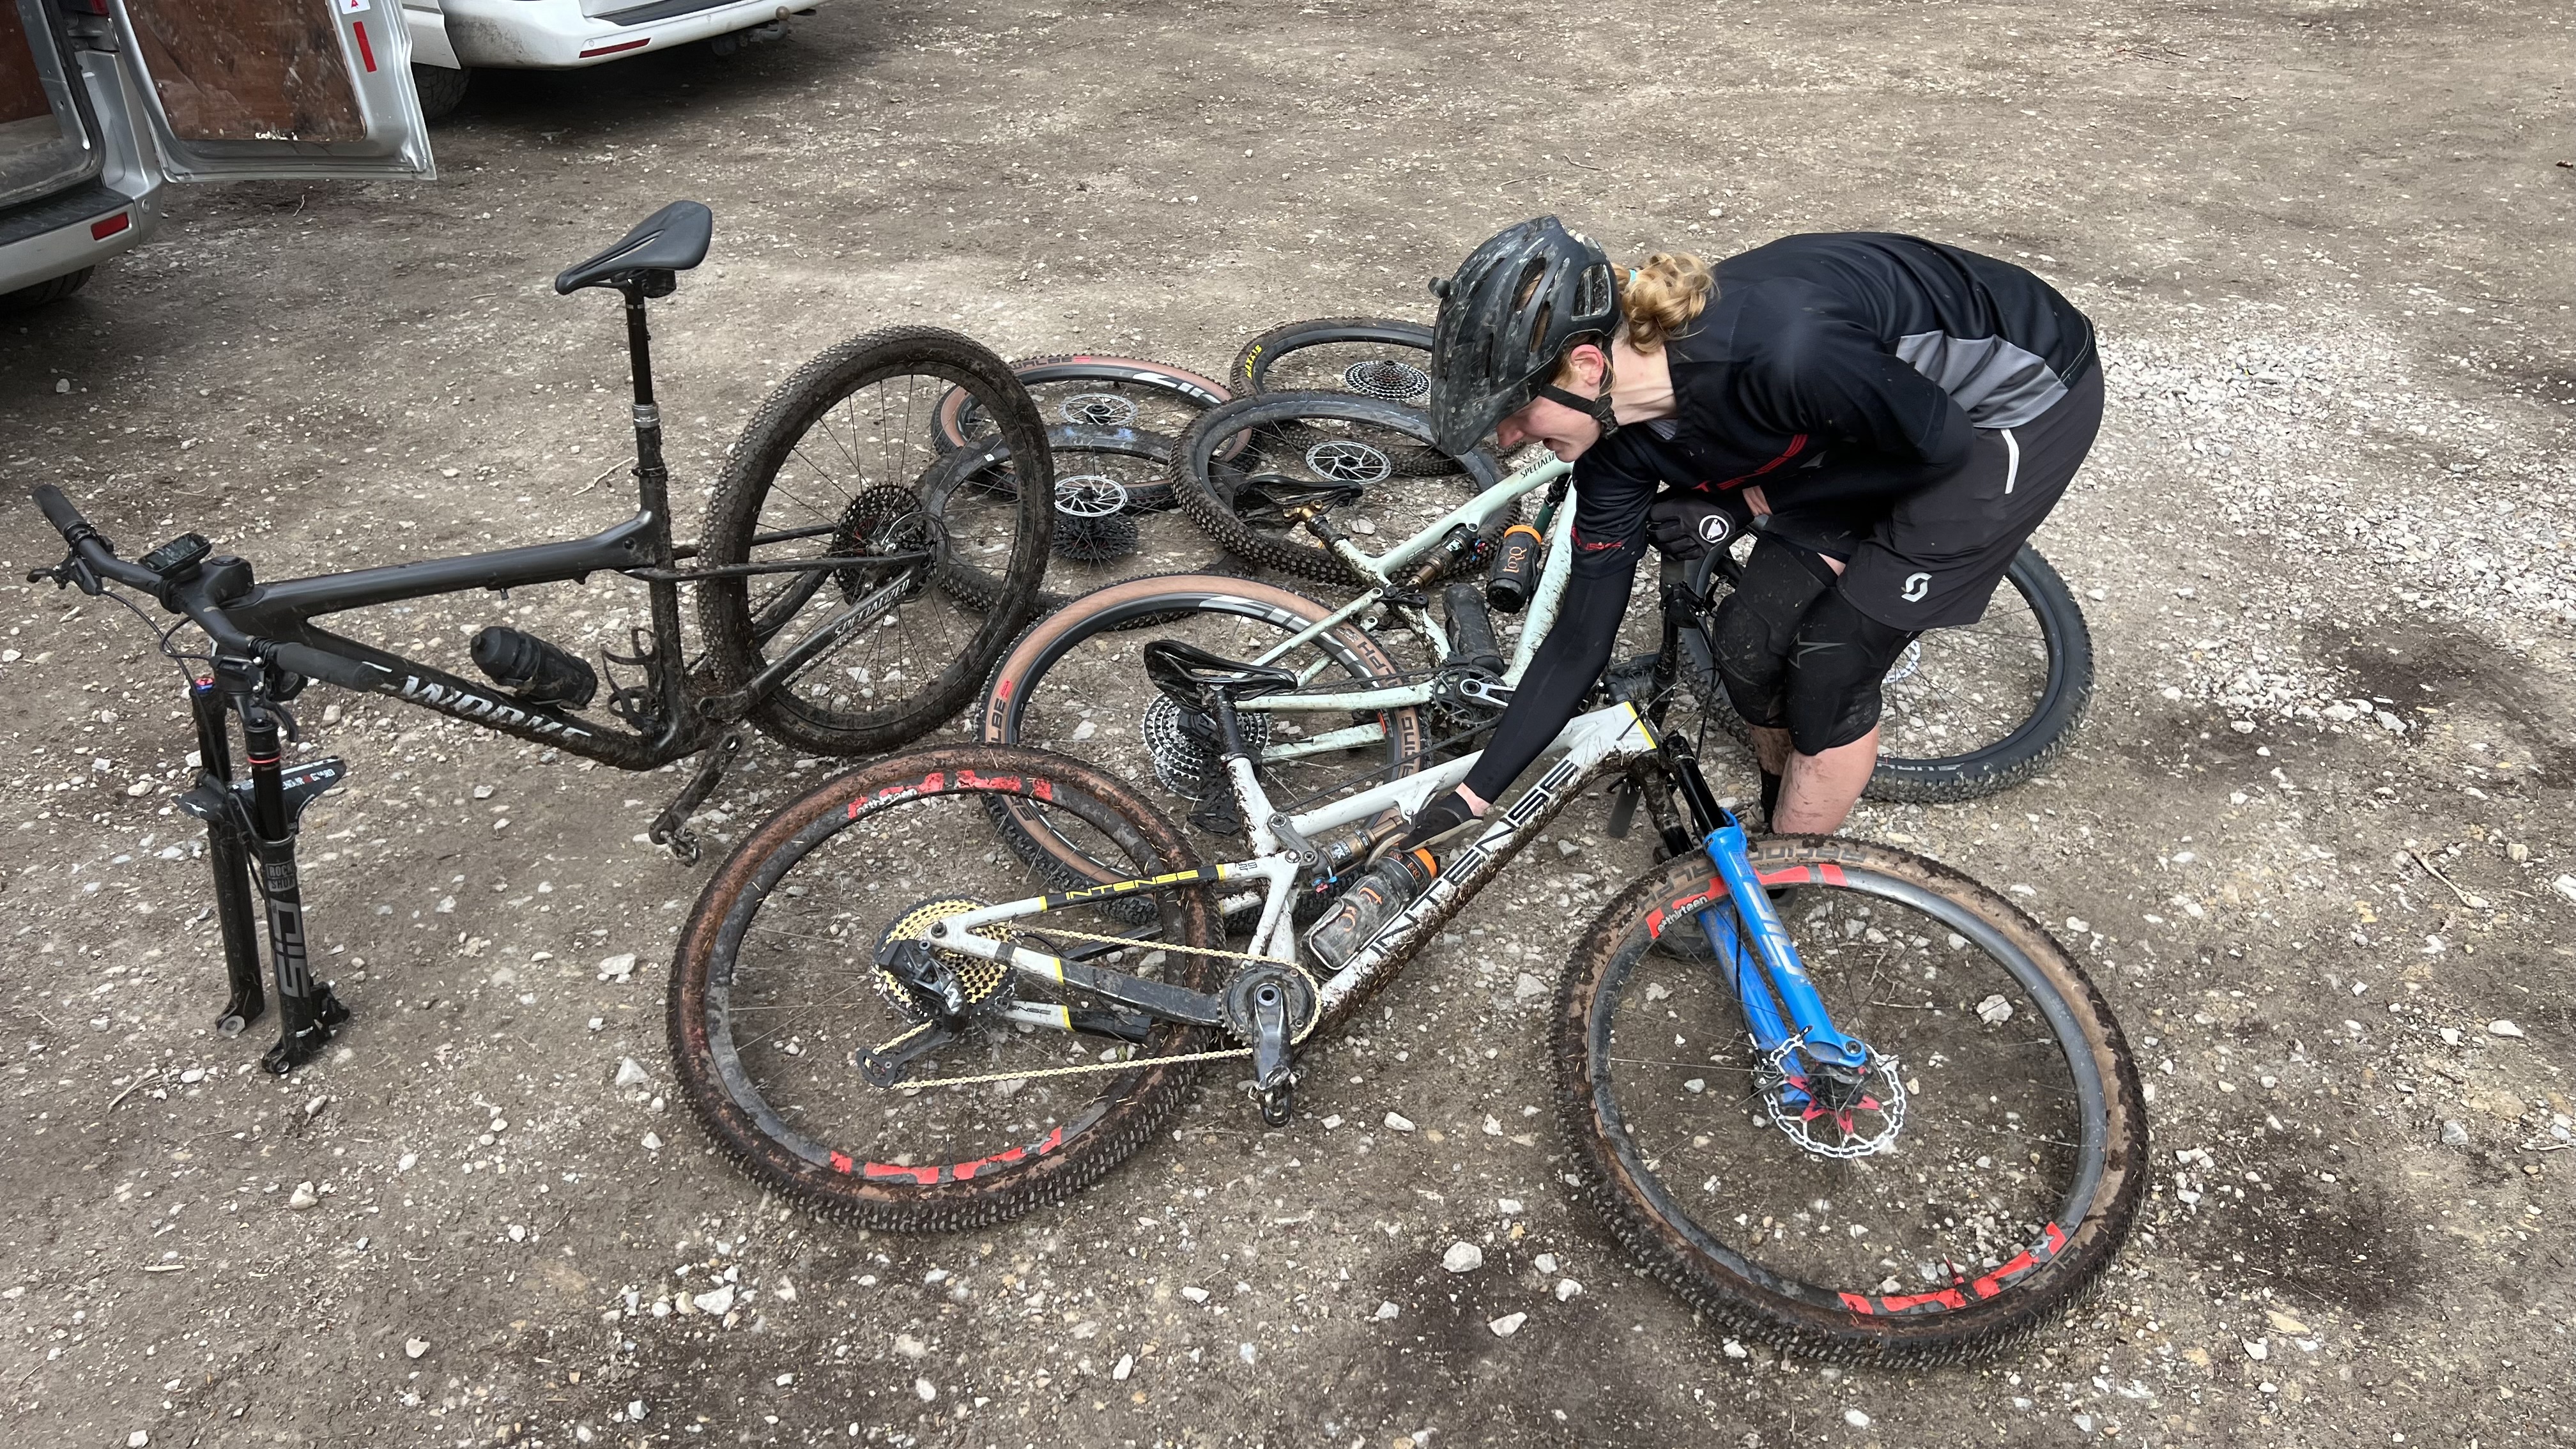 Rider picking tires from a heap of bikes and race rubber